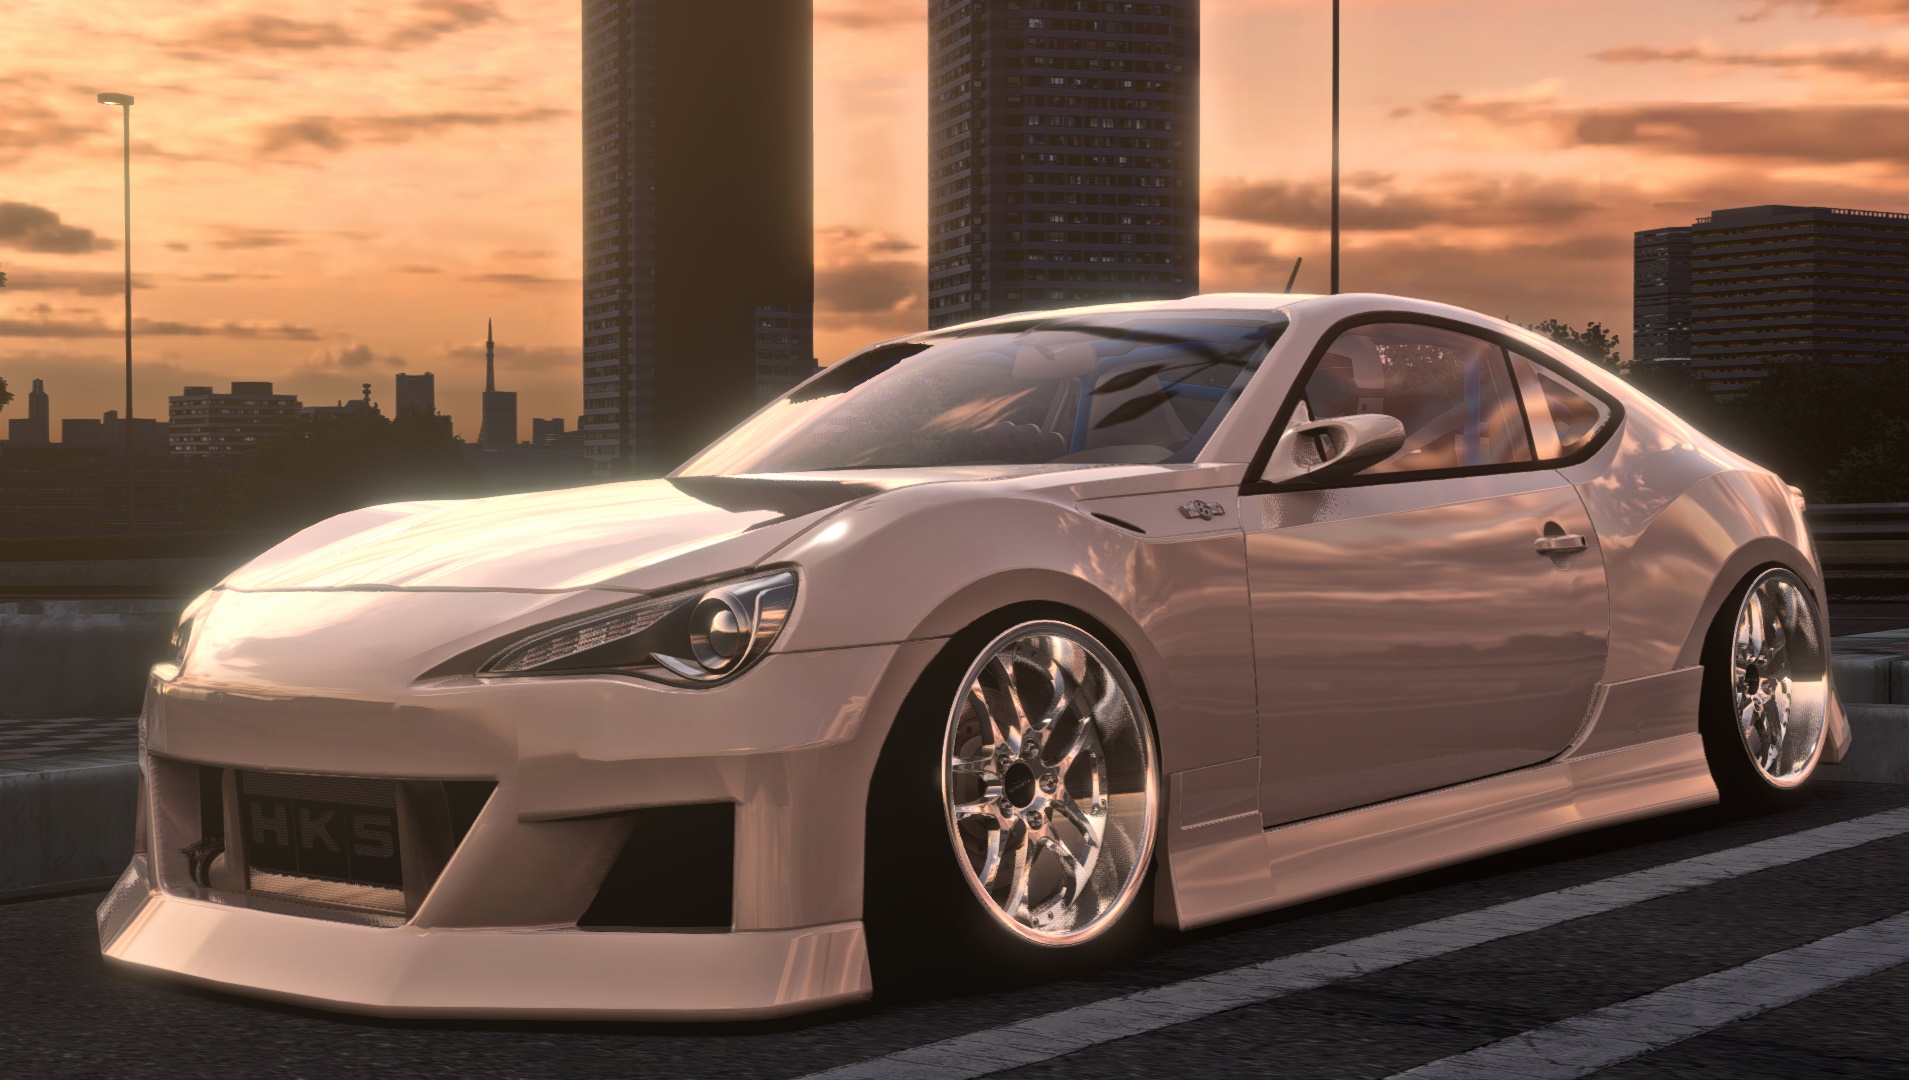 GOODCHOICE Scion FRS Preview Image